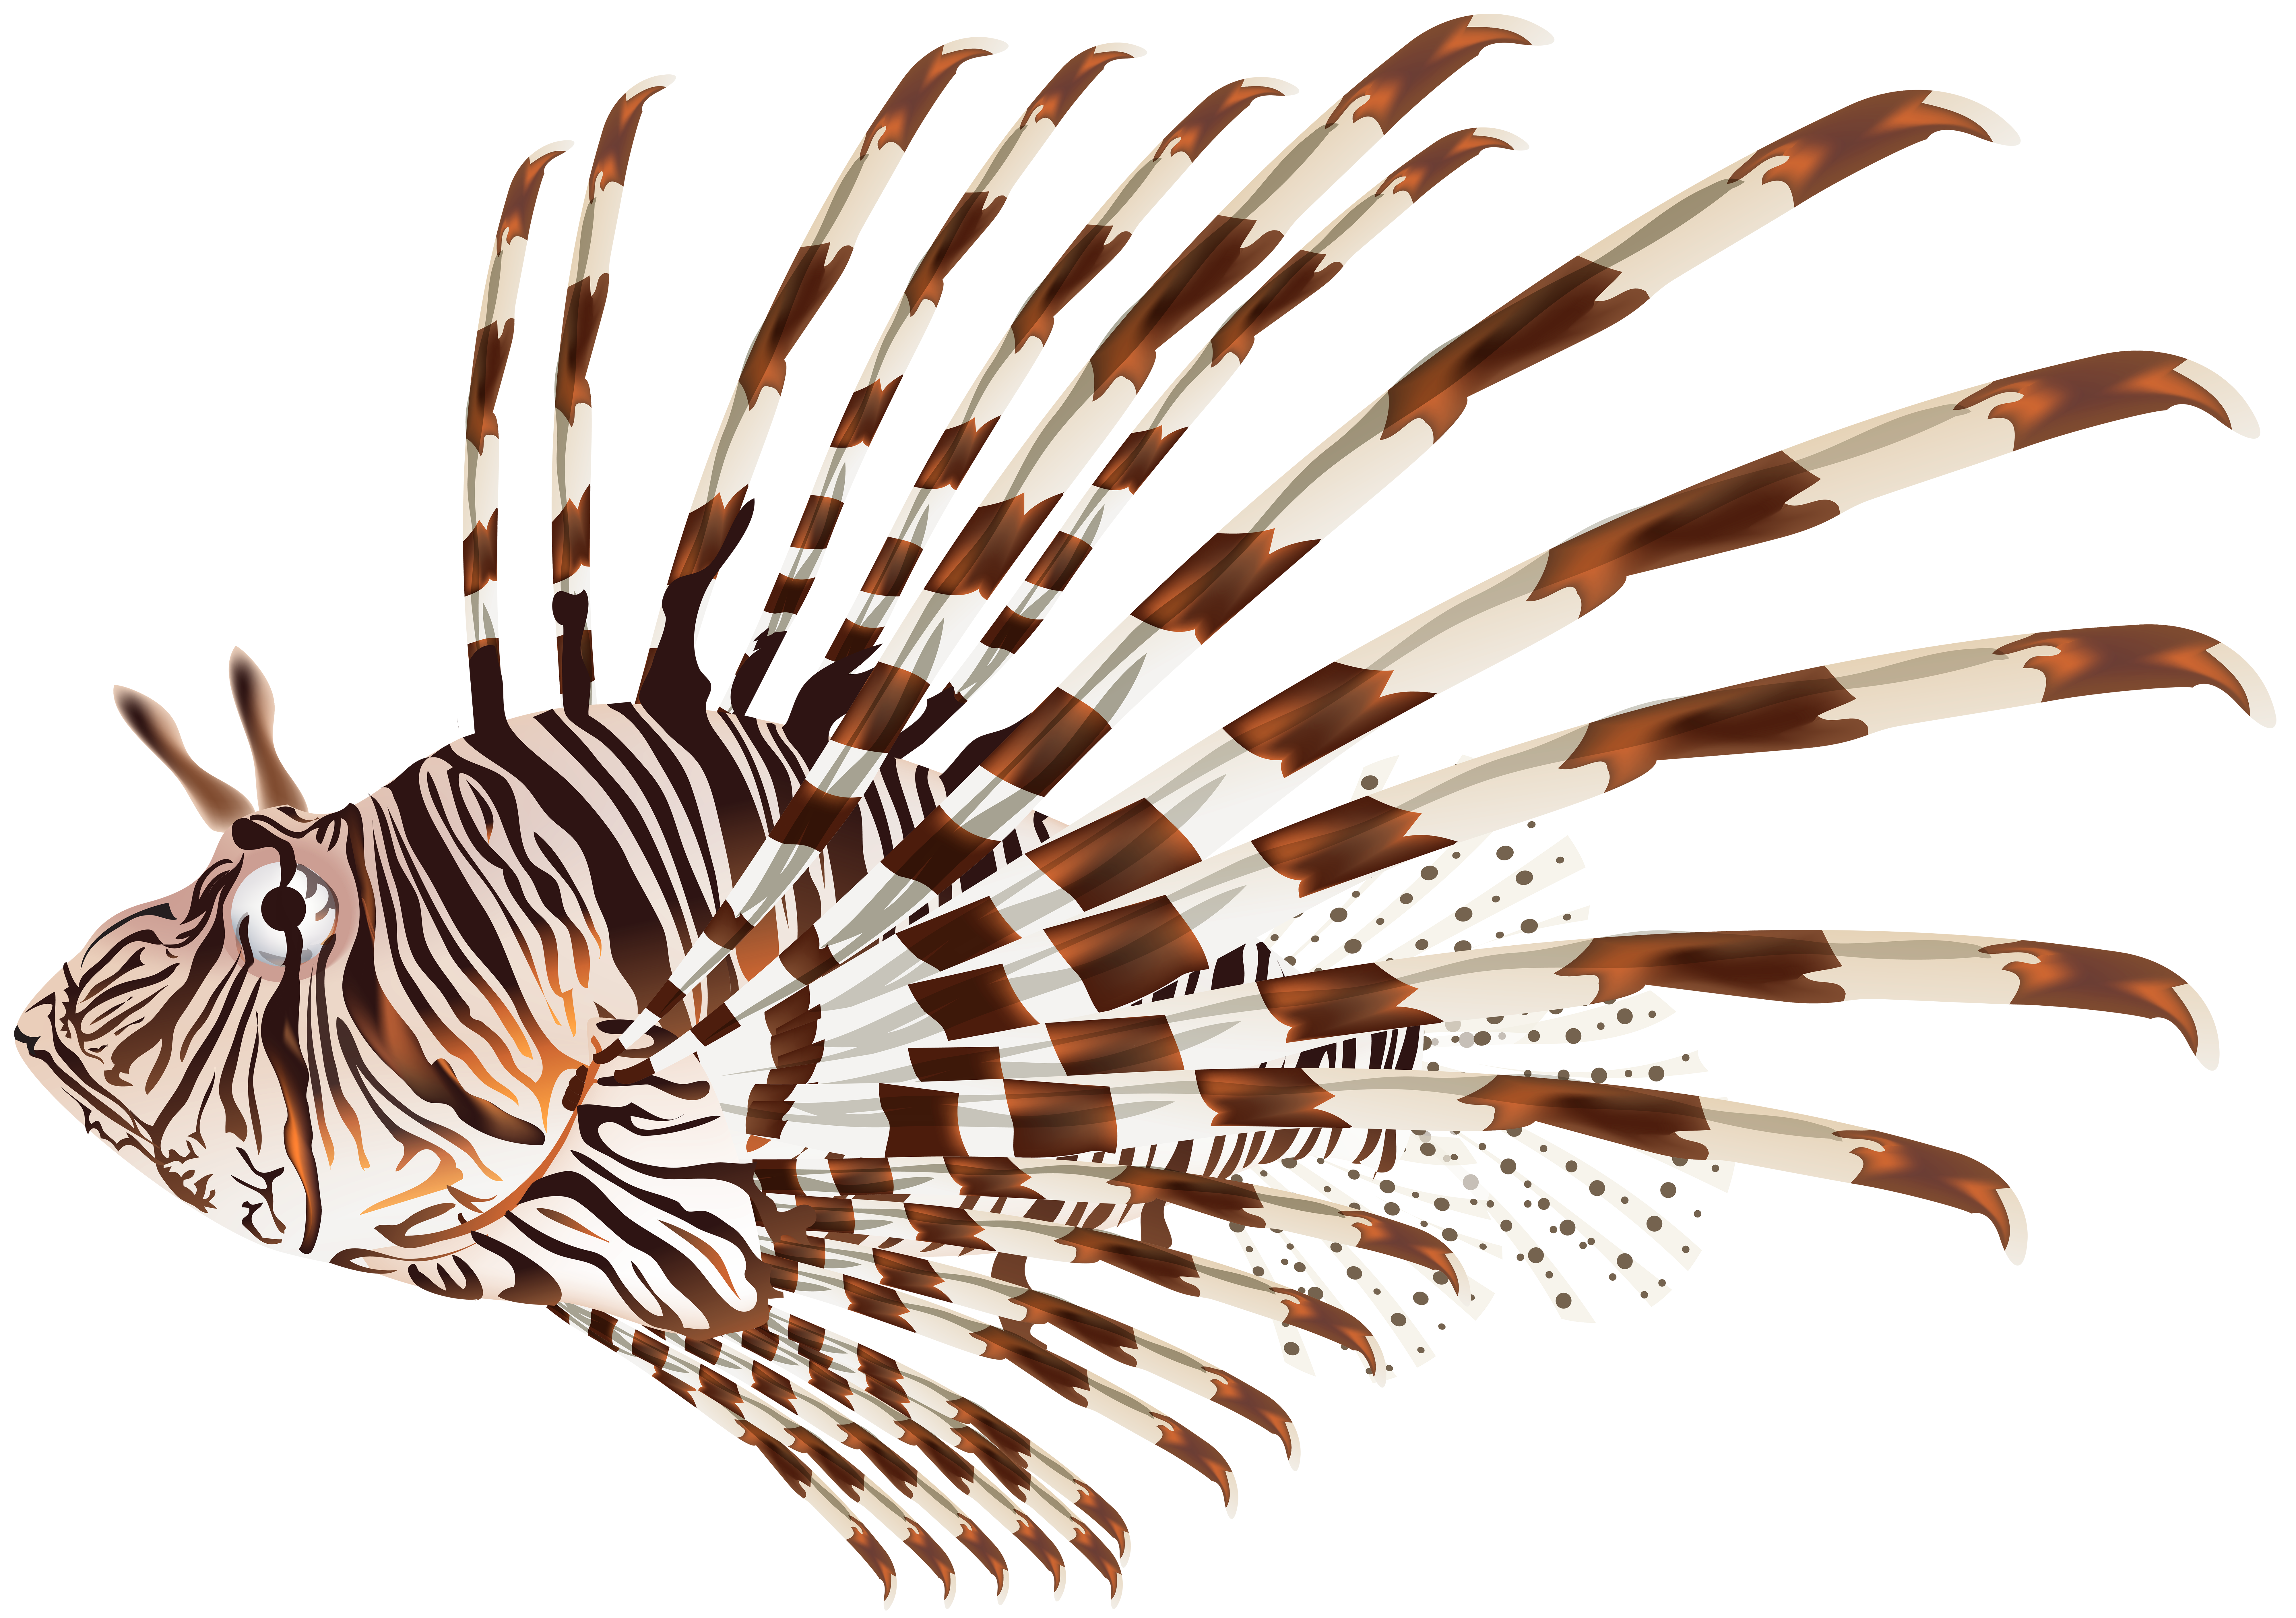 fish clipart clear background